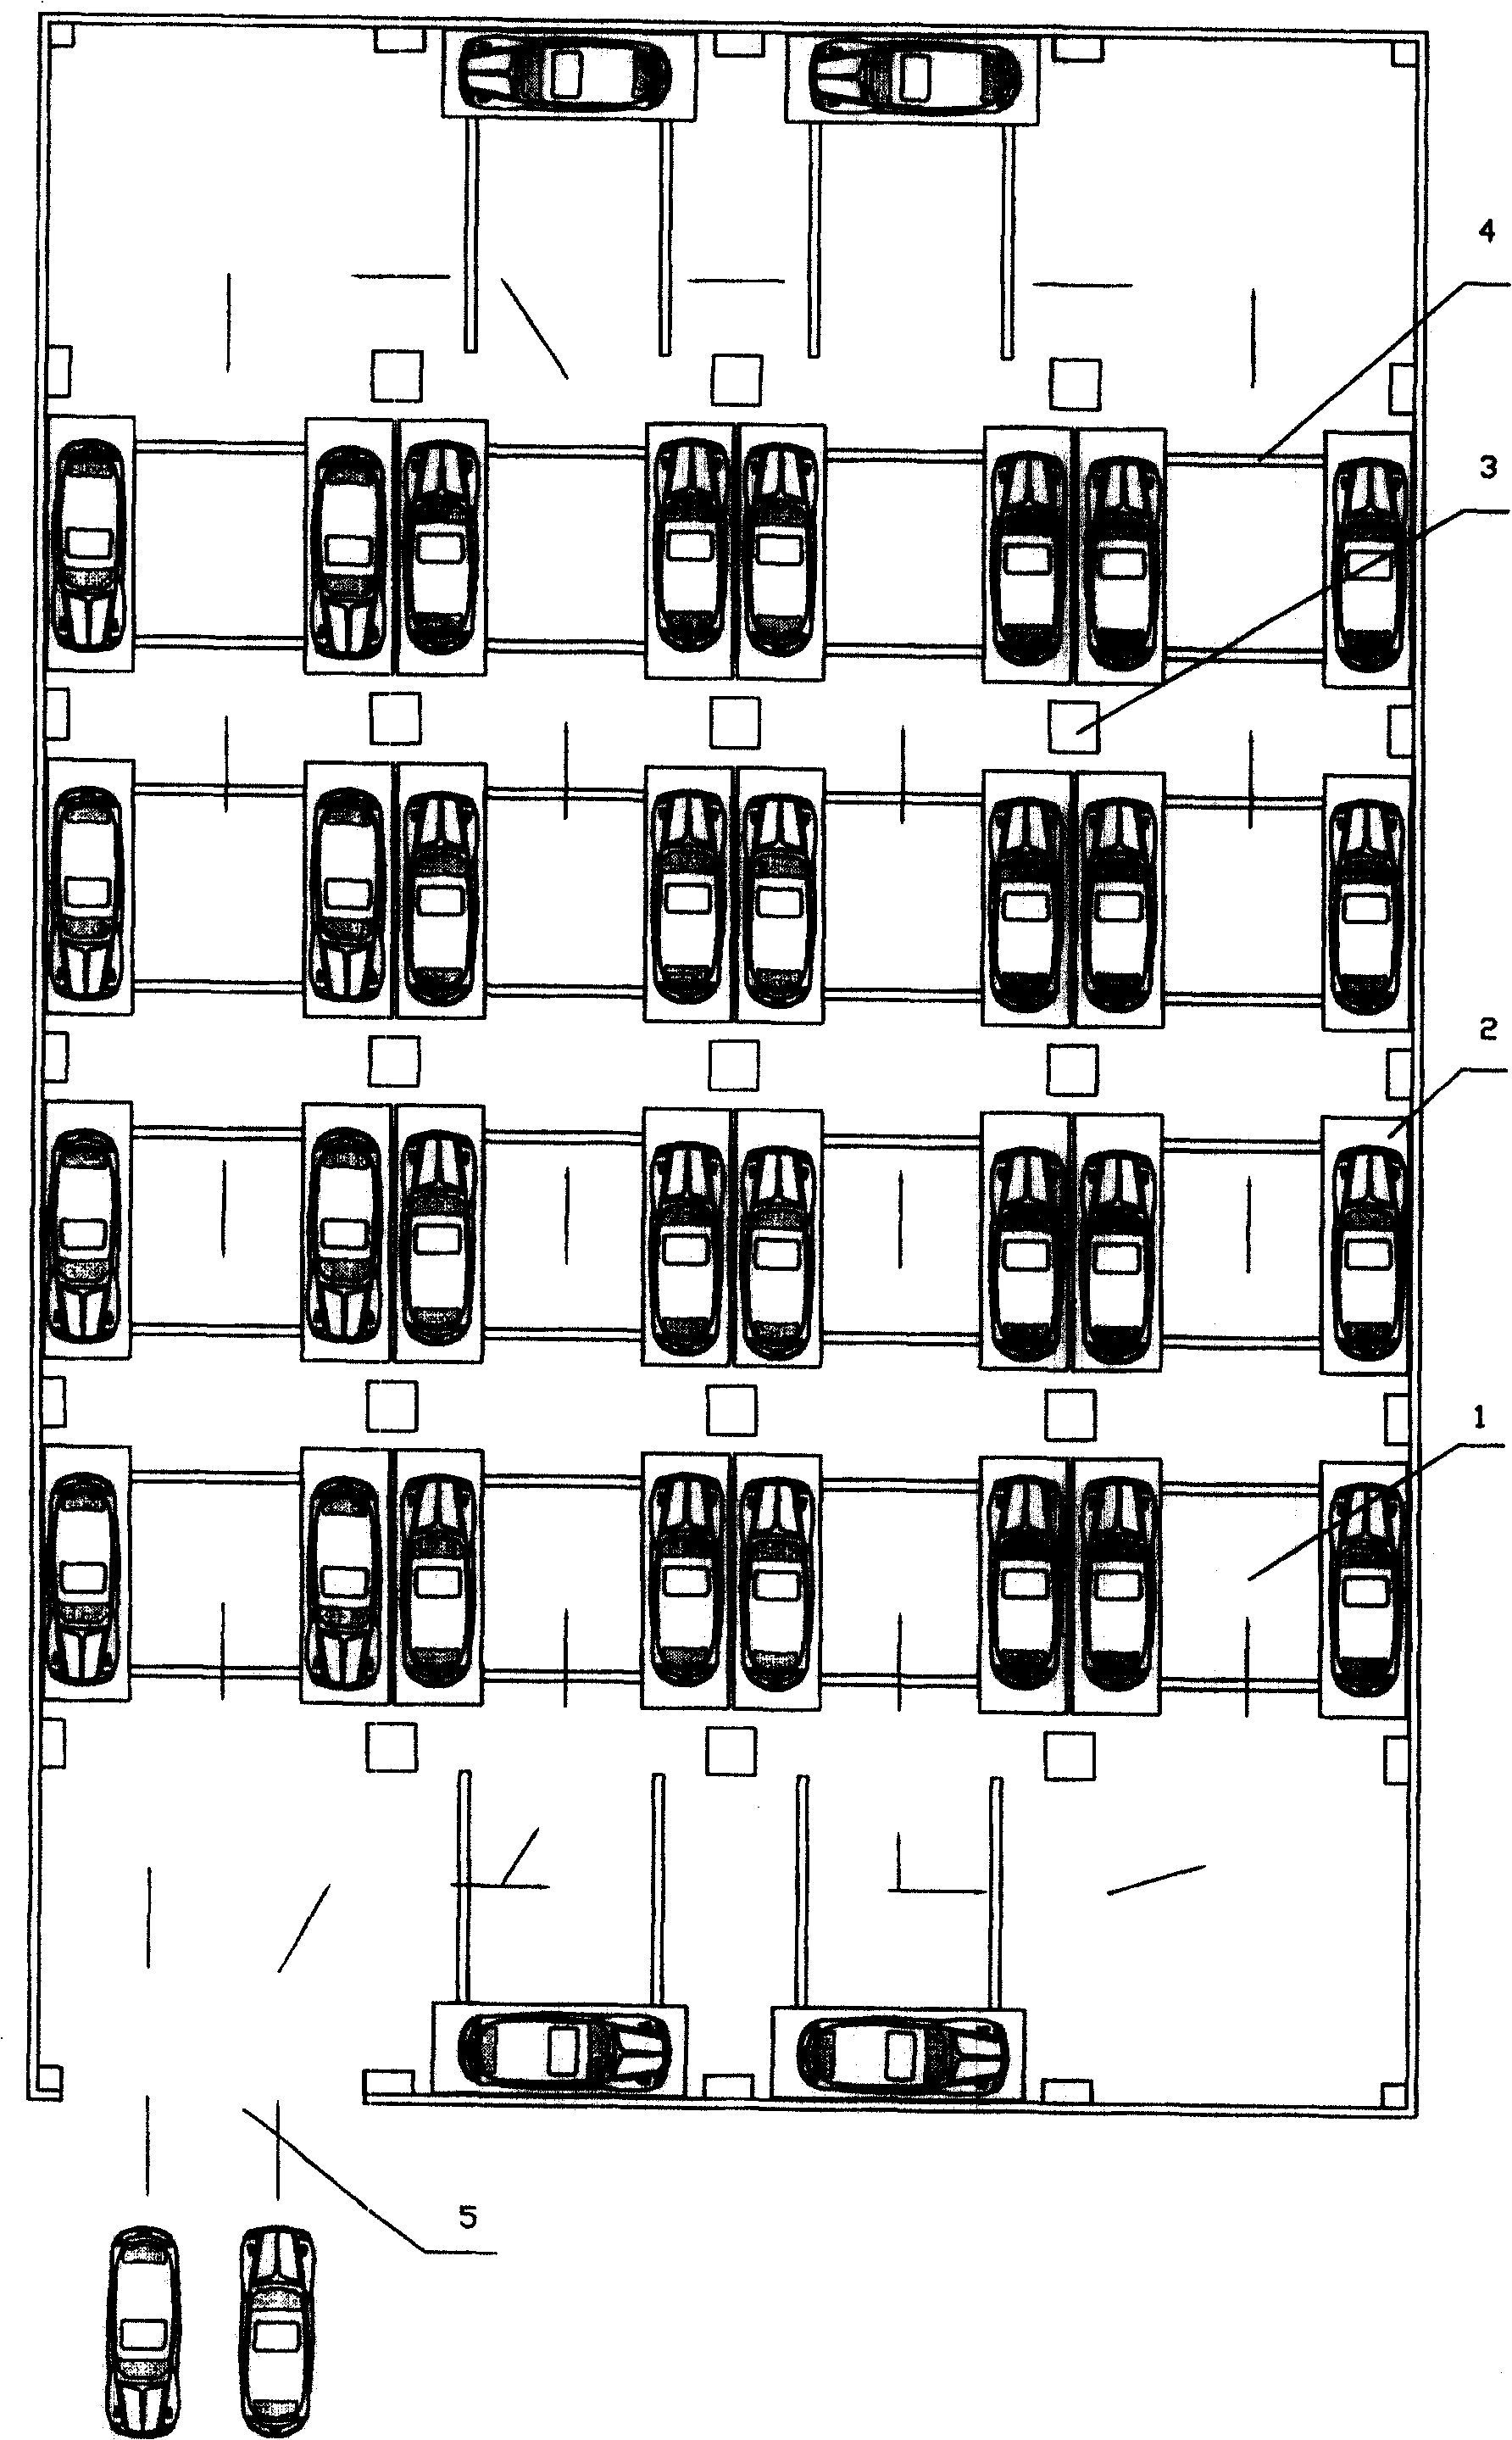 Double-deck stereoscopic parking method